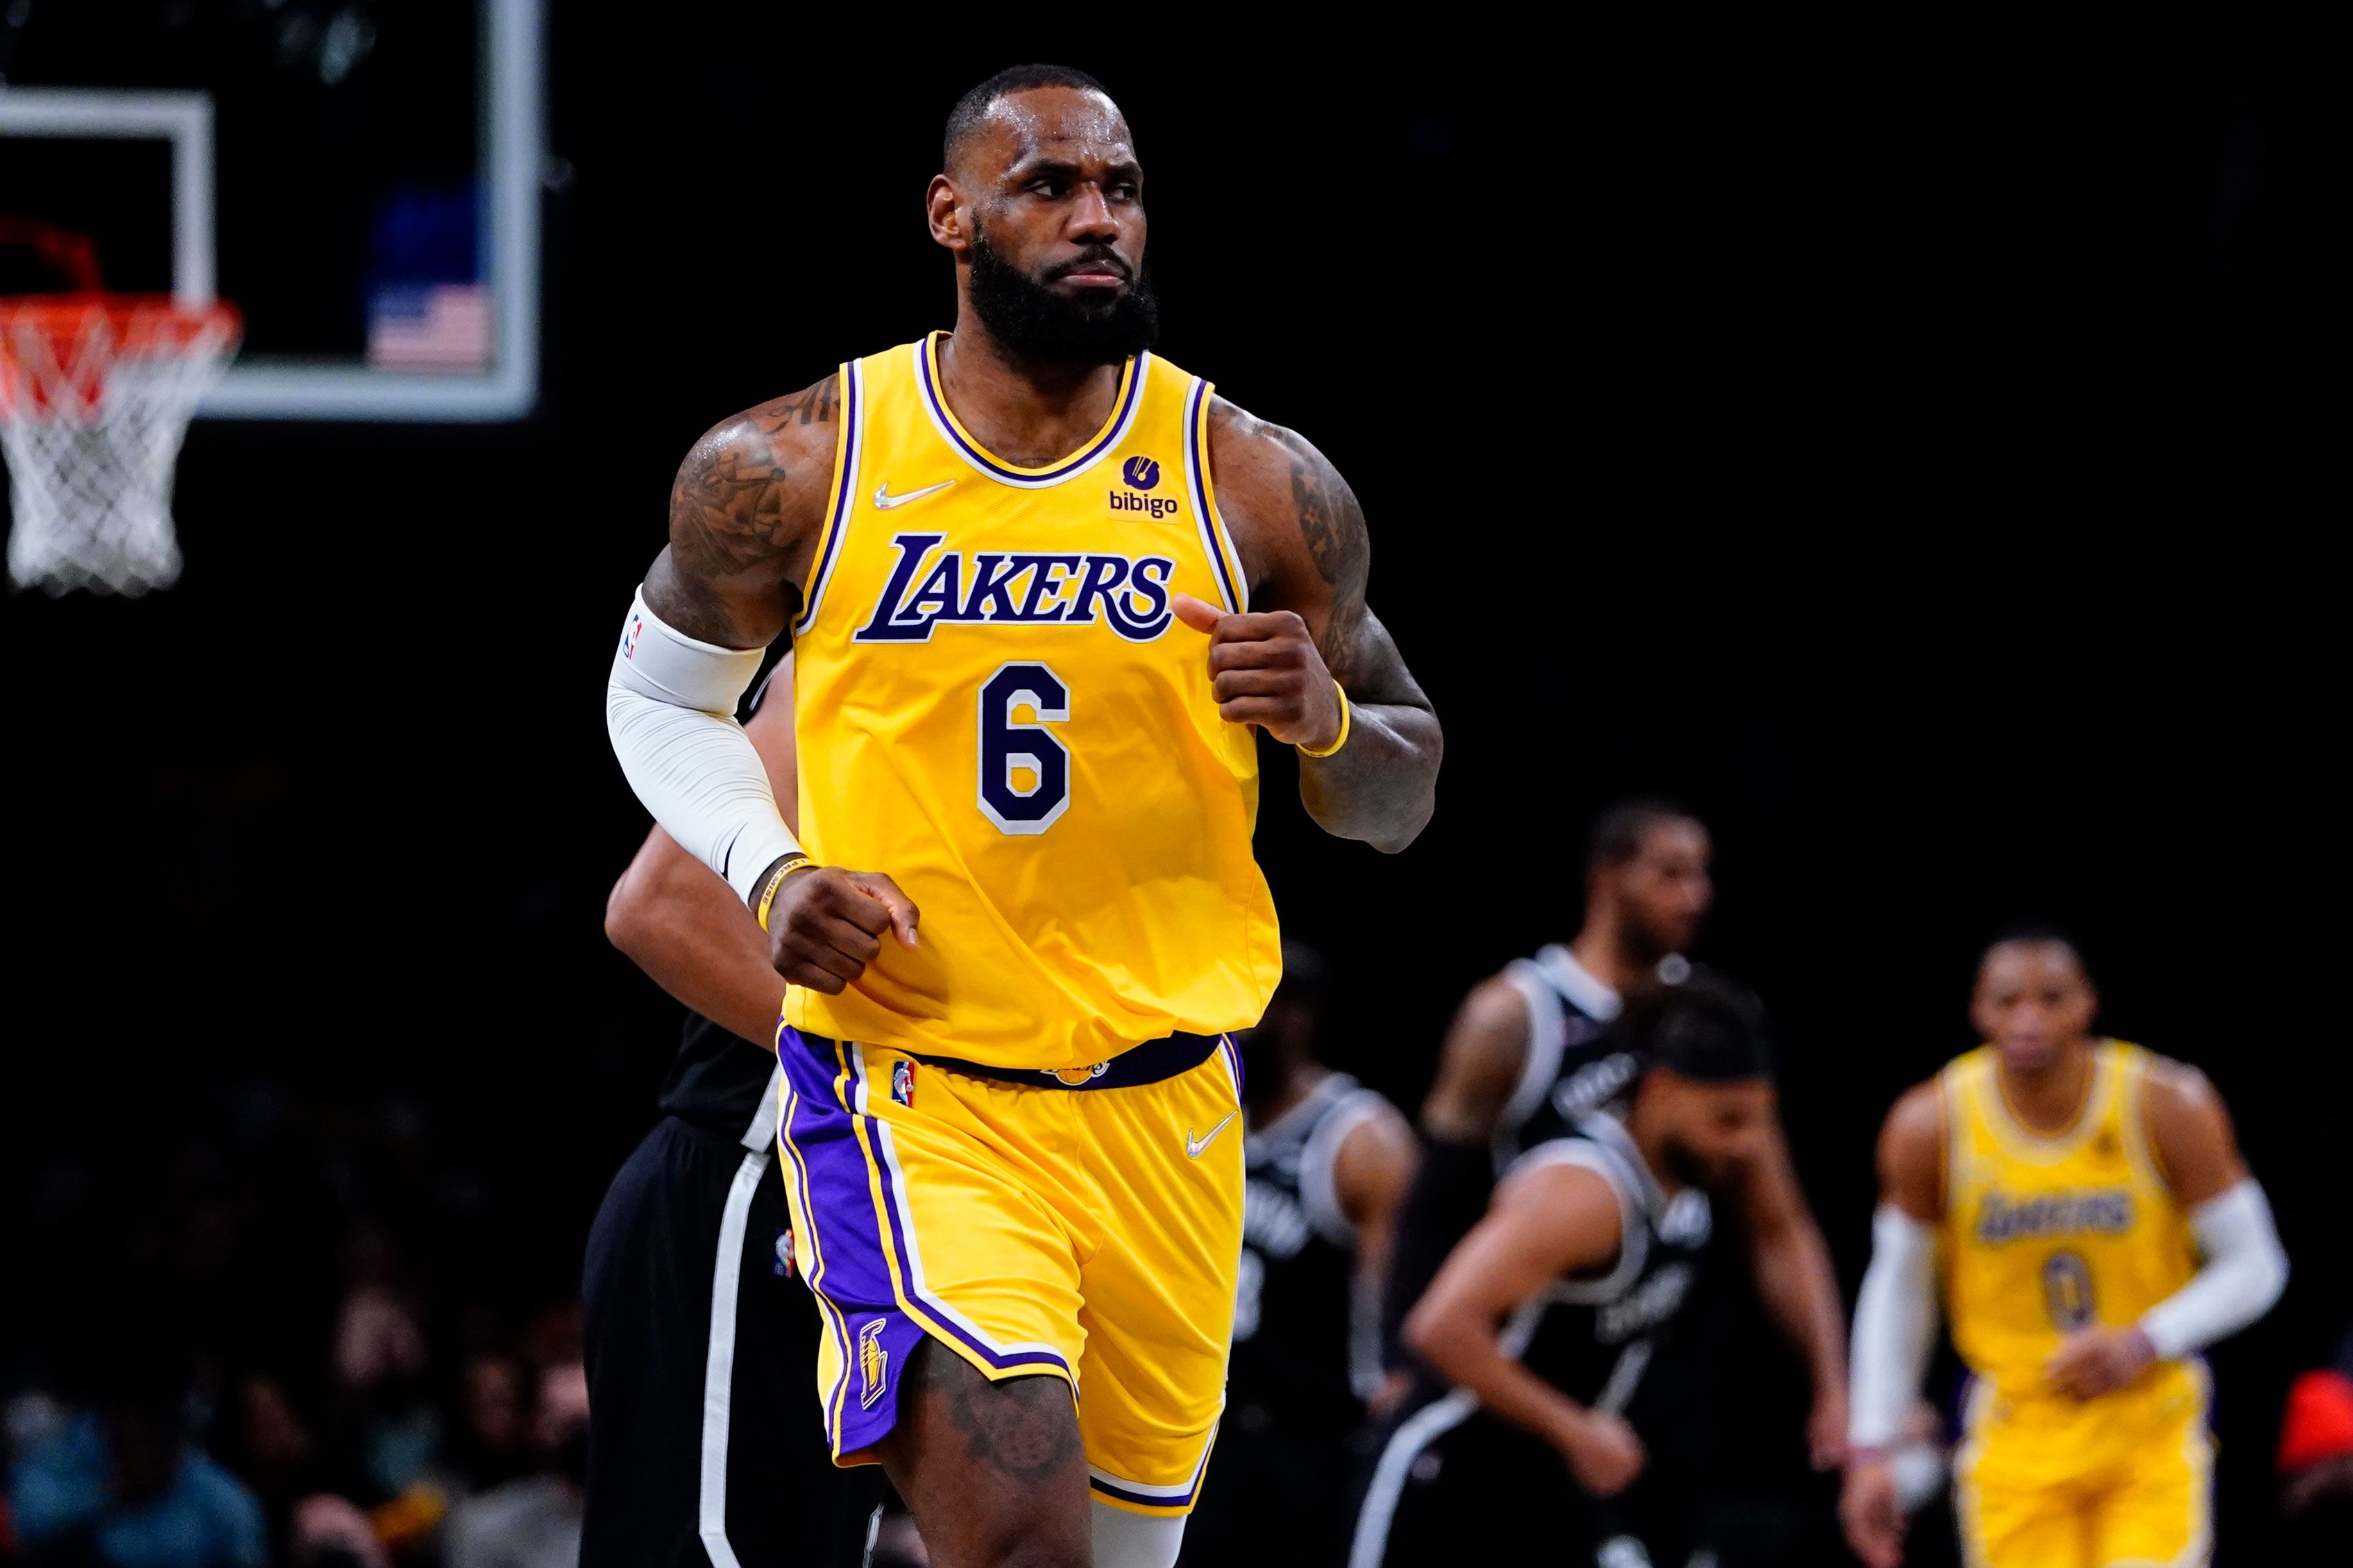 Los Angeles Lakers star LeBron James named to 19th consecutive All-NBA team